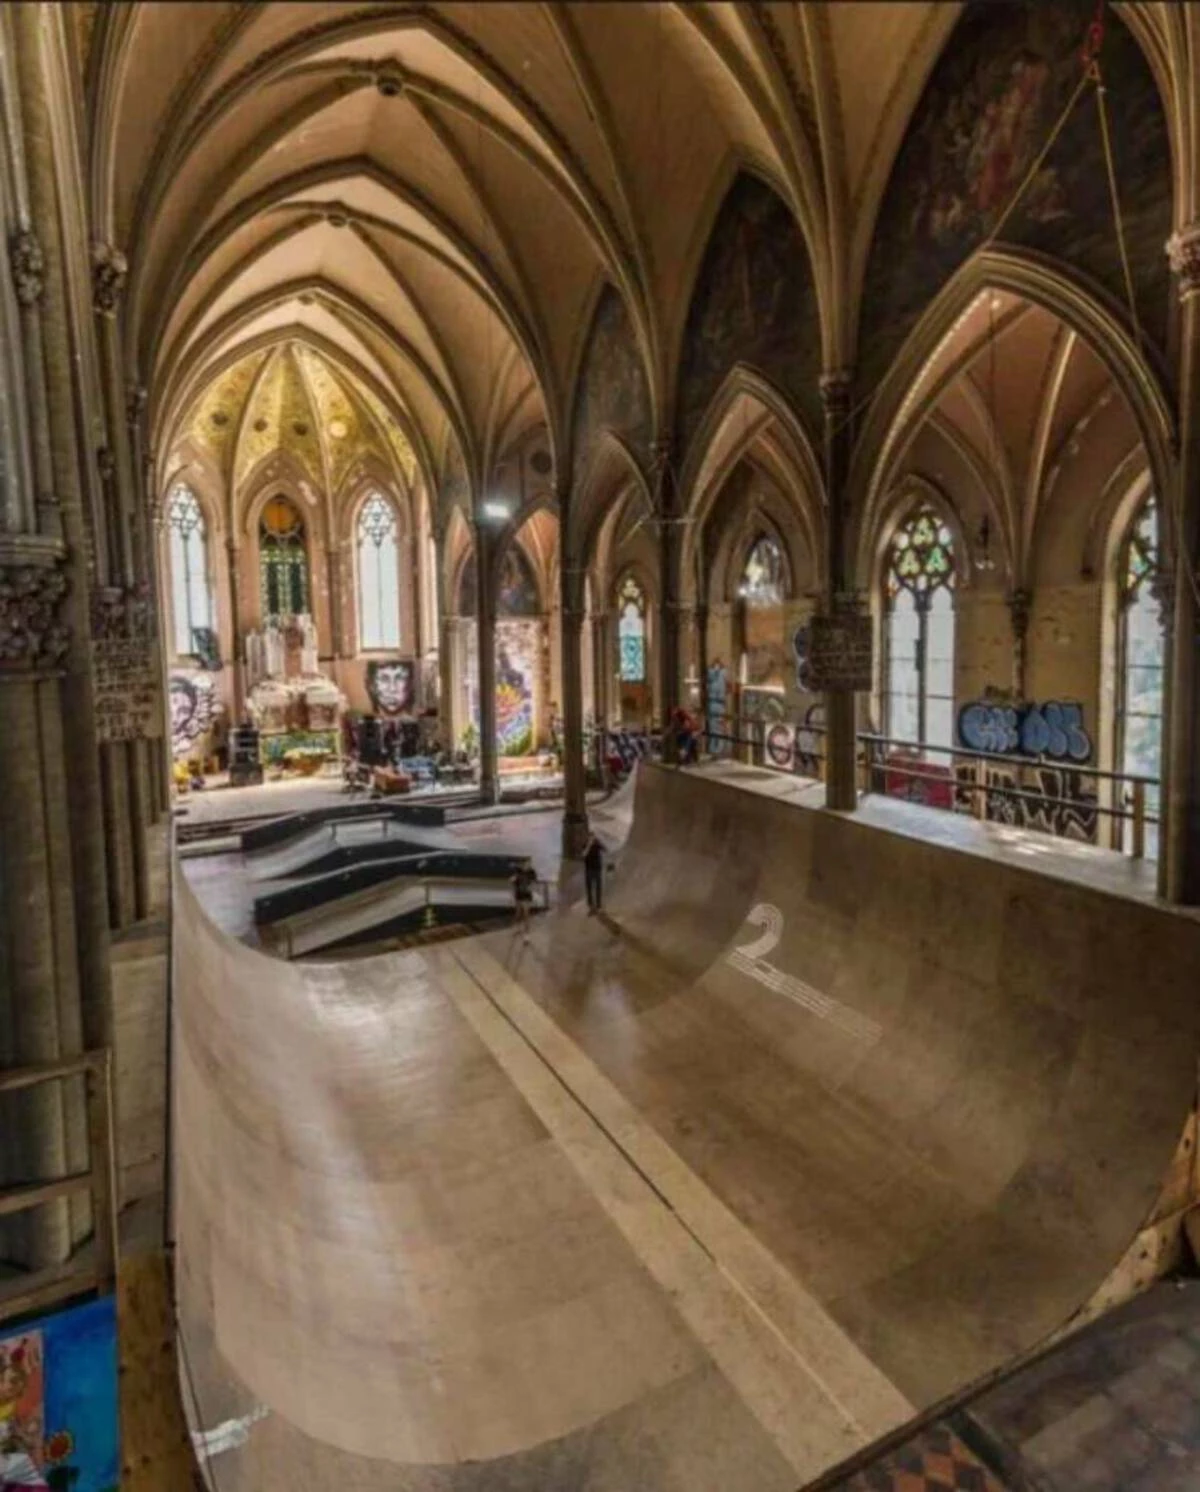 The Most Religious Skatepark There Is